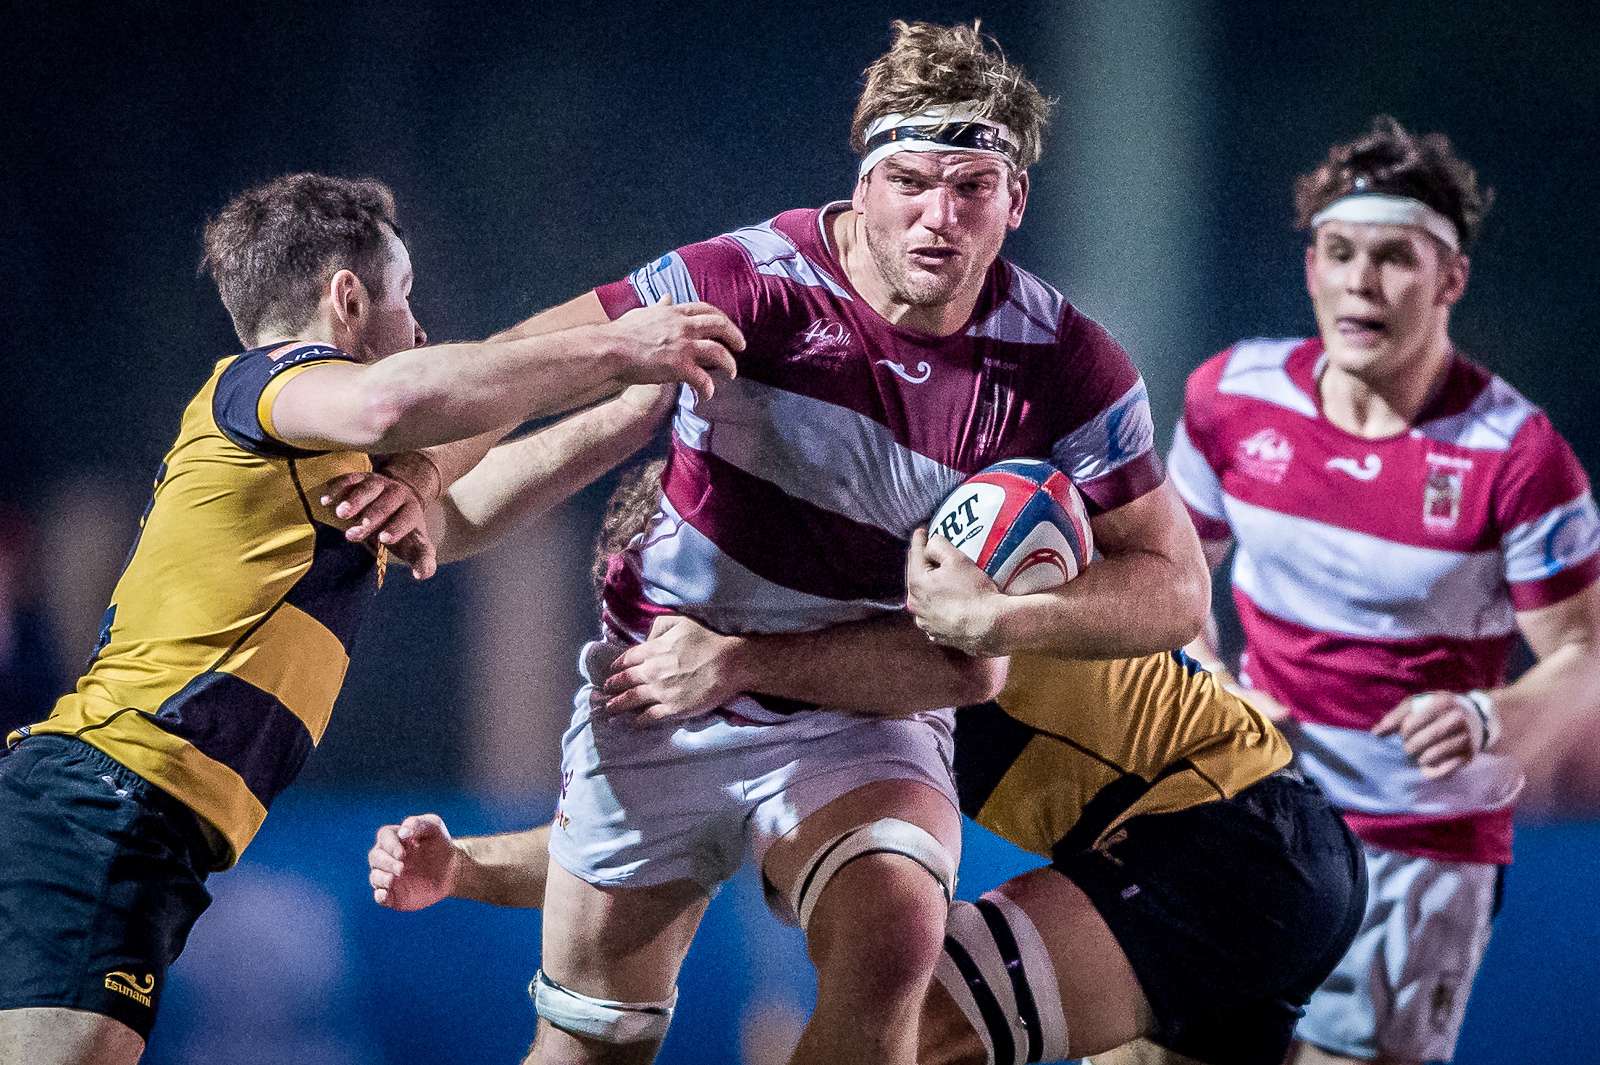 Kowloon’s James Cunningham fights his way forward in his side’s win over Tigers in the Hong Kong Premiership. Photo: HKRU